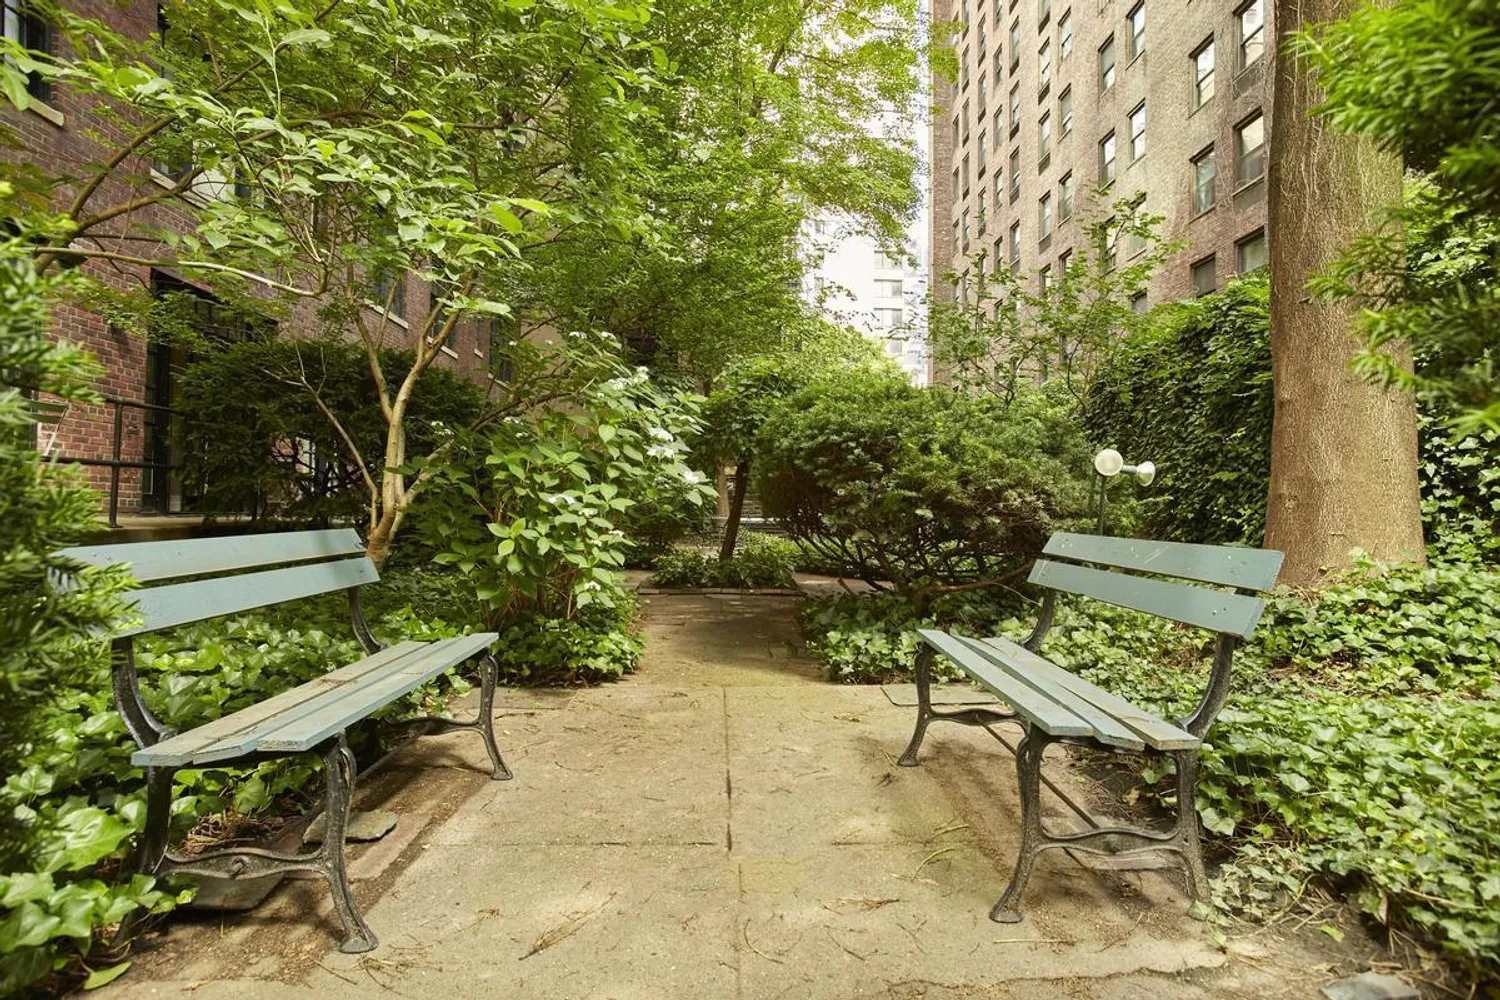 The quiet common courtyard has lush plantings.